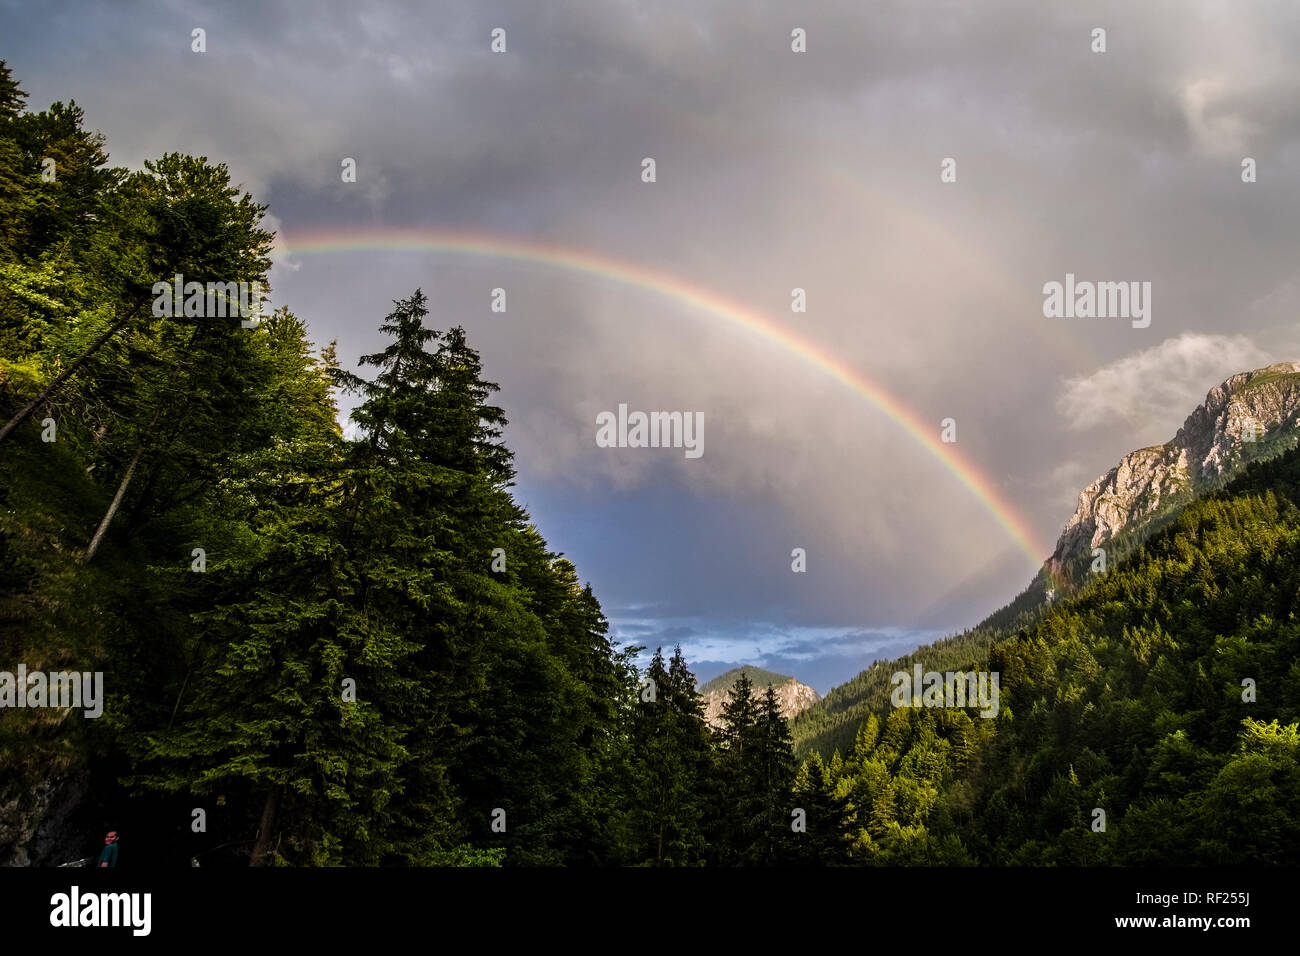 Colorful rainbow between mountains, dark thunderstorm clouds in the distance Stock Photo